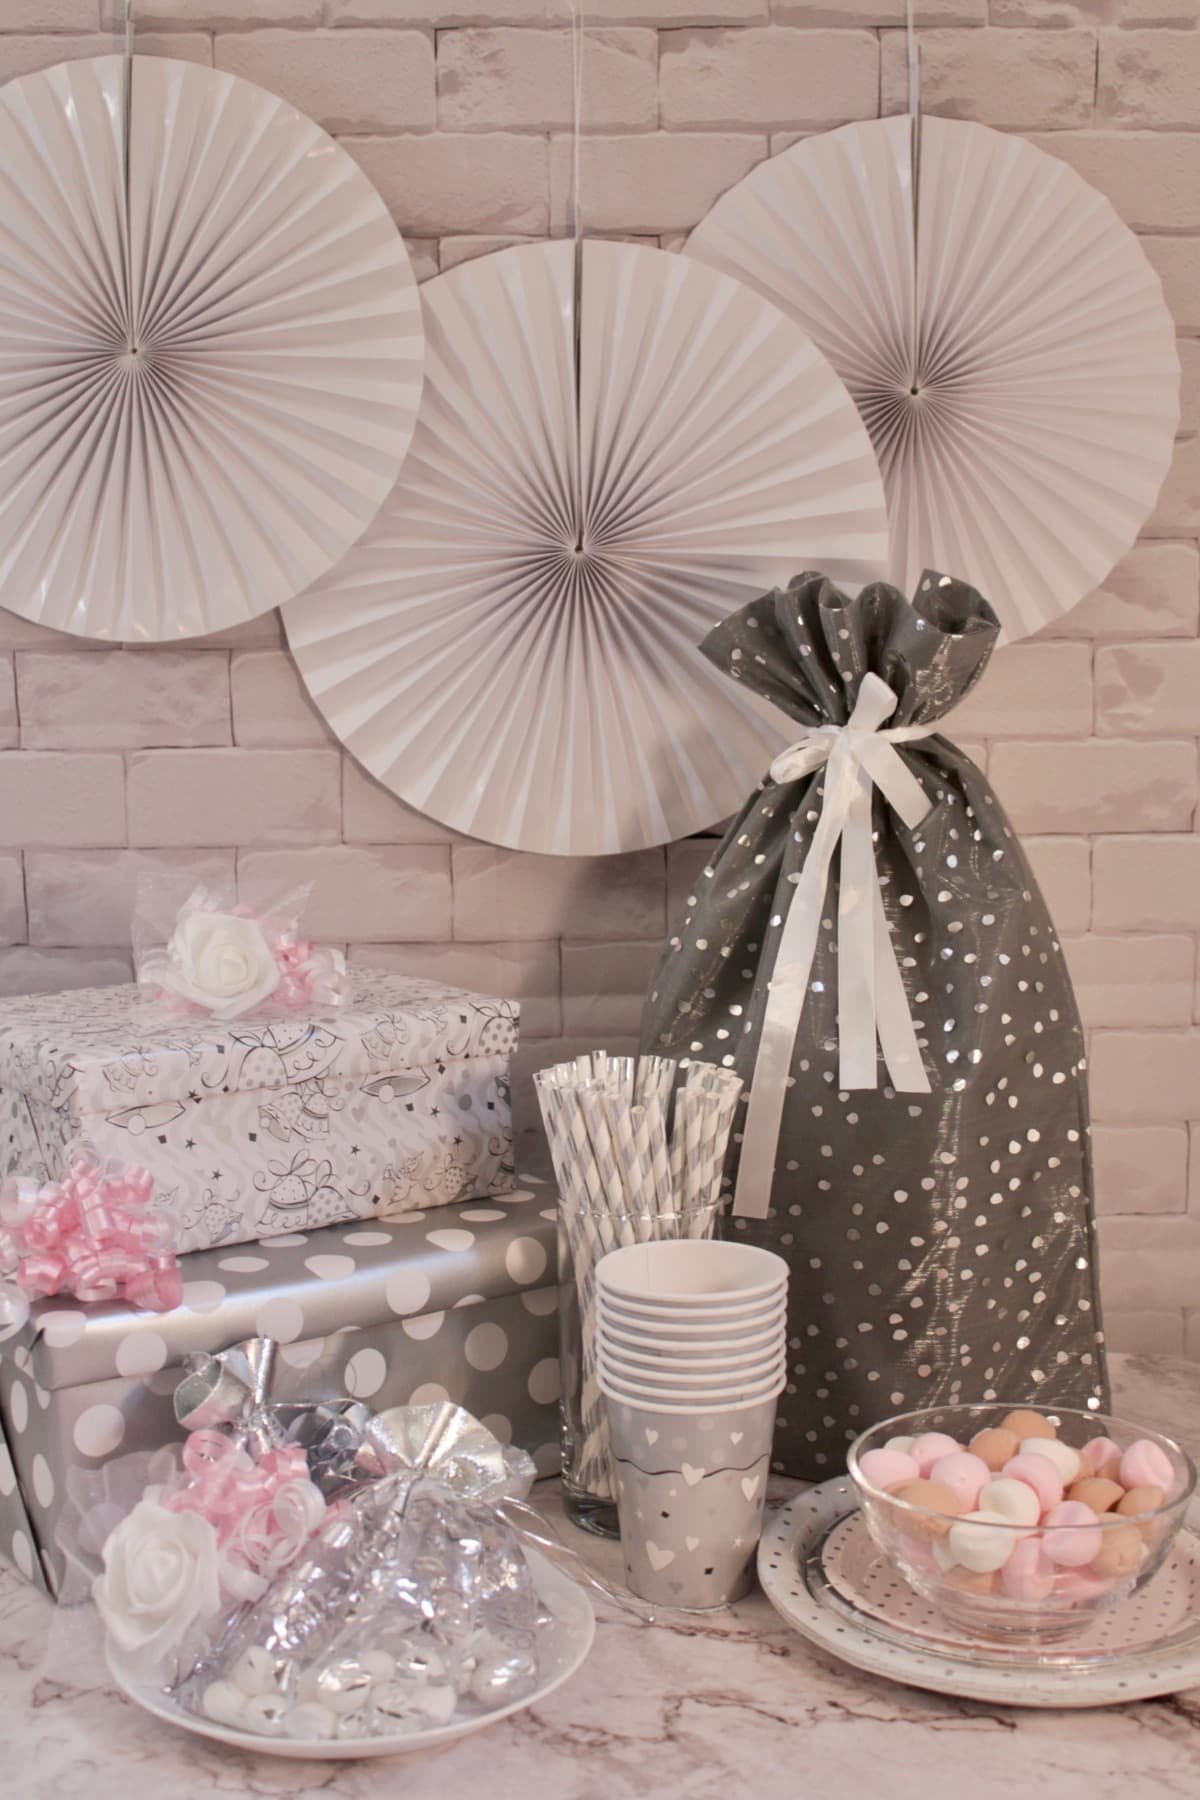 5 Simple Bridal Shower Ideas To Celebrate A Bride-To-Be